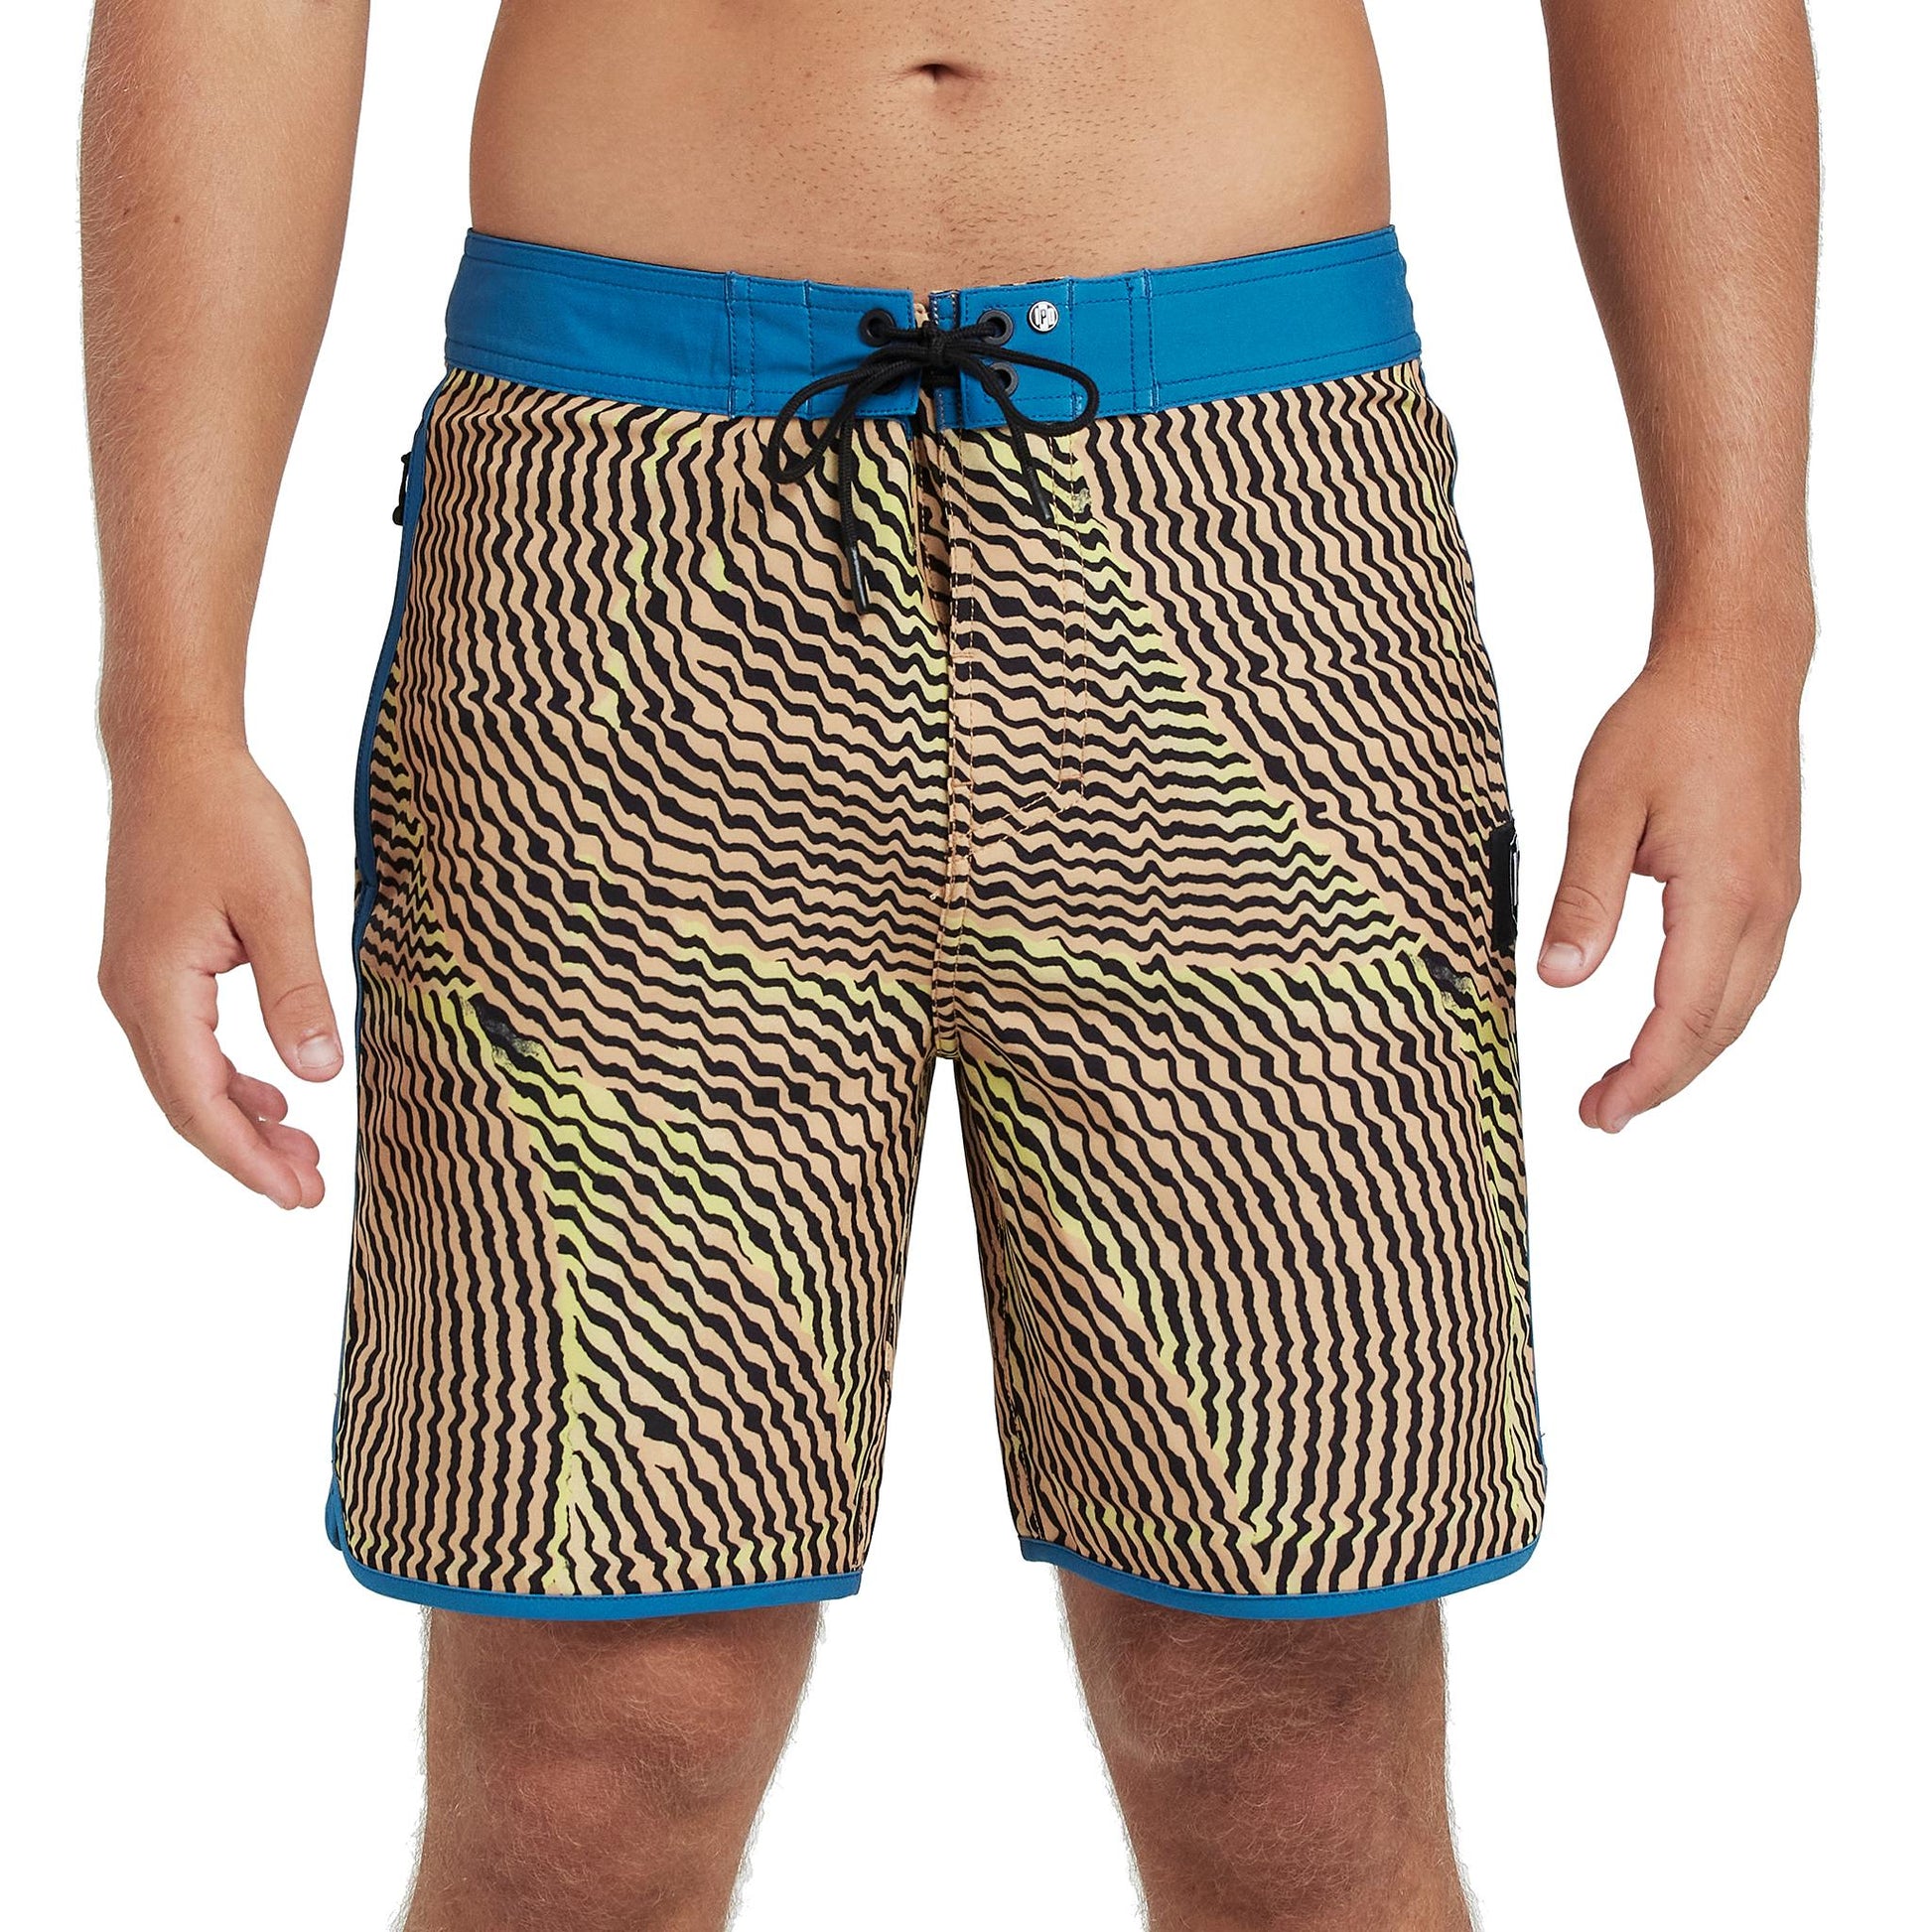 FREQUENCY 83 FIT 18" BOARDSHORT – South Coast Surf Shops Online